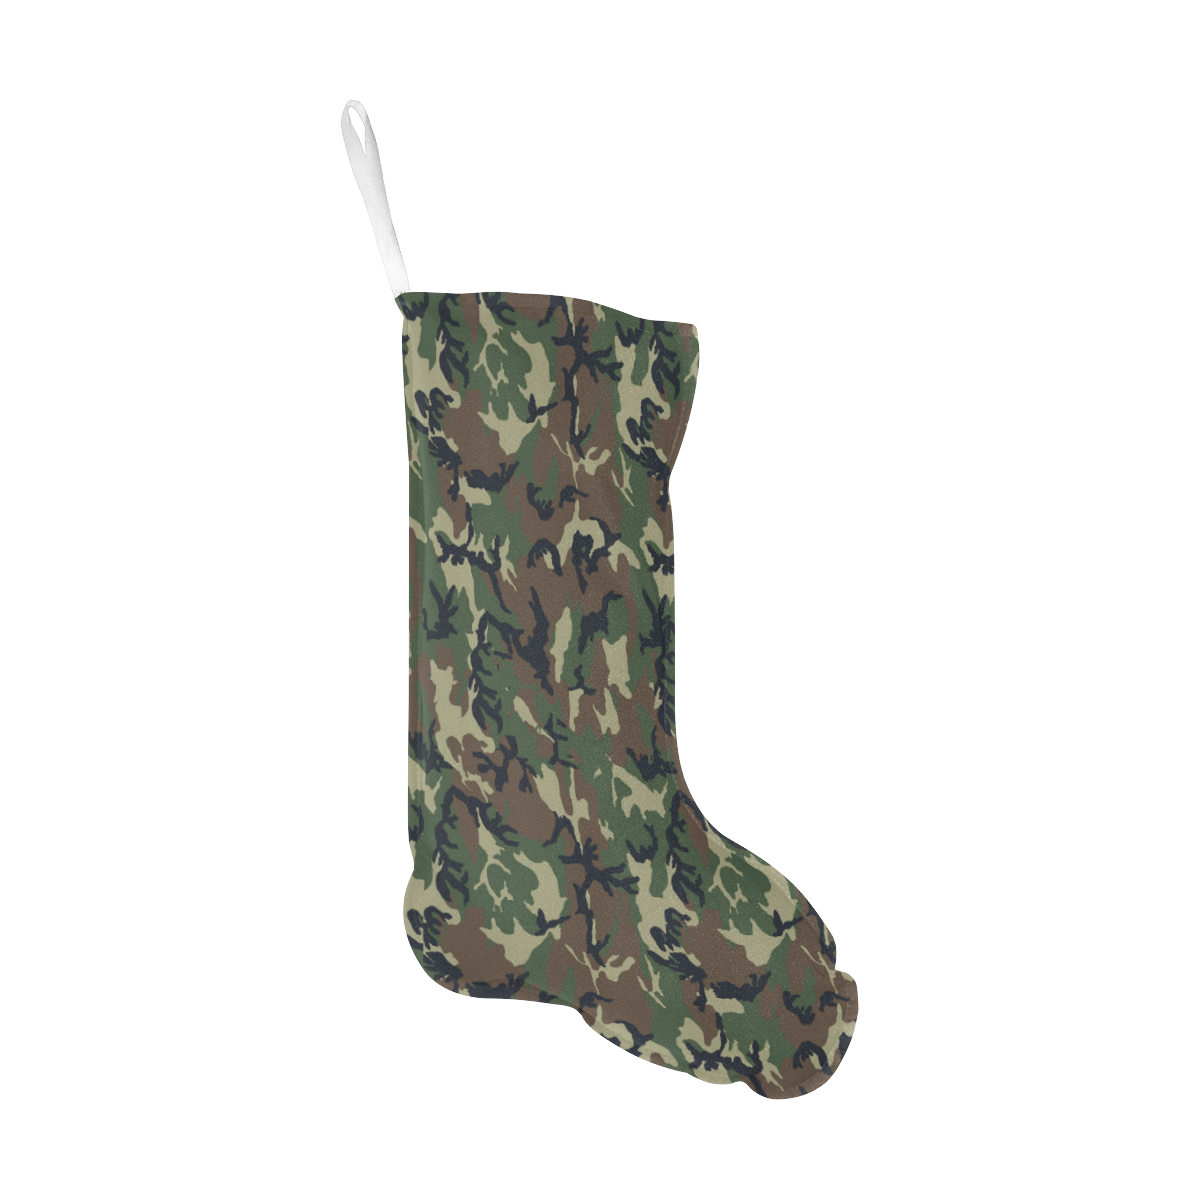 Woodland Forest Green Camouflage Christmas Stocking (Without Folded Top)